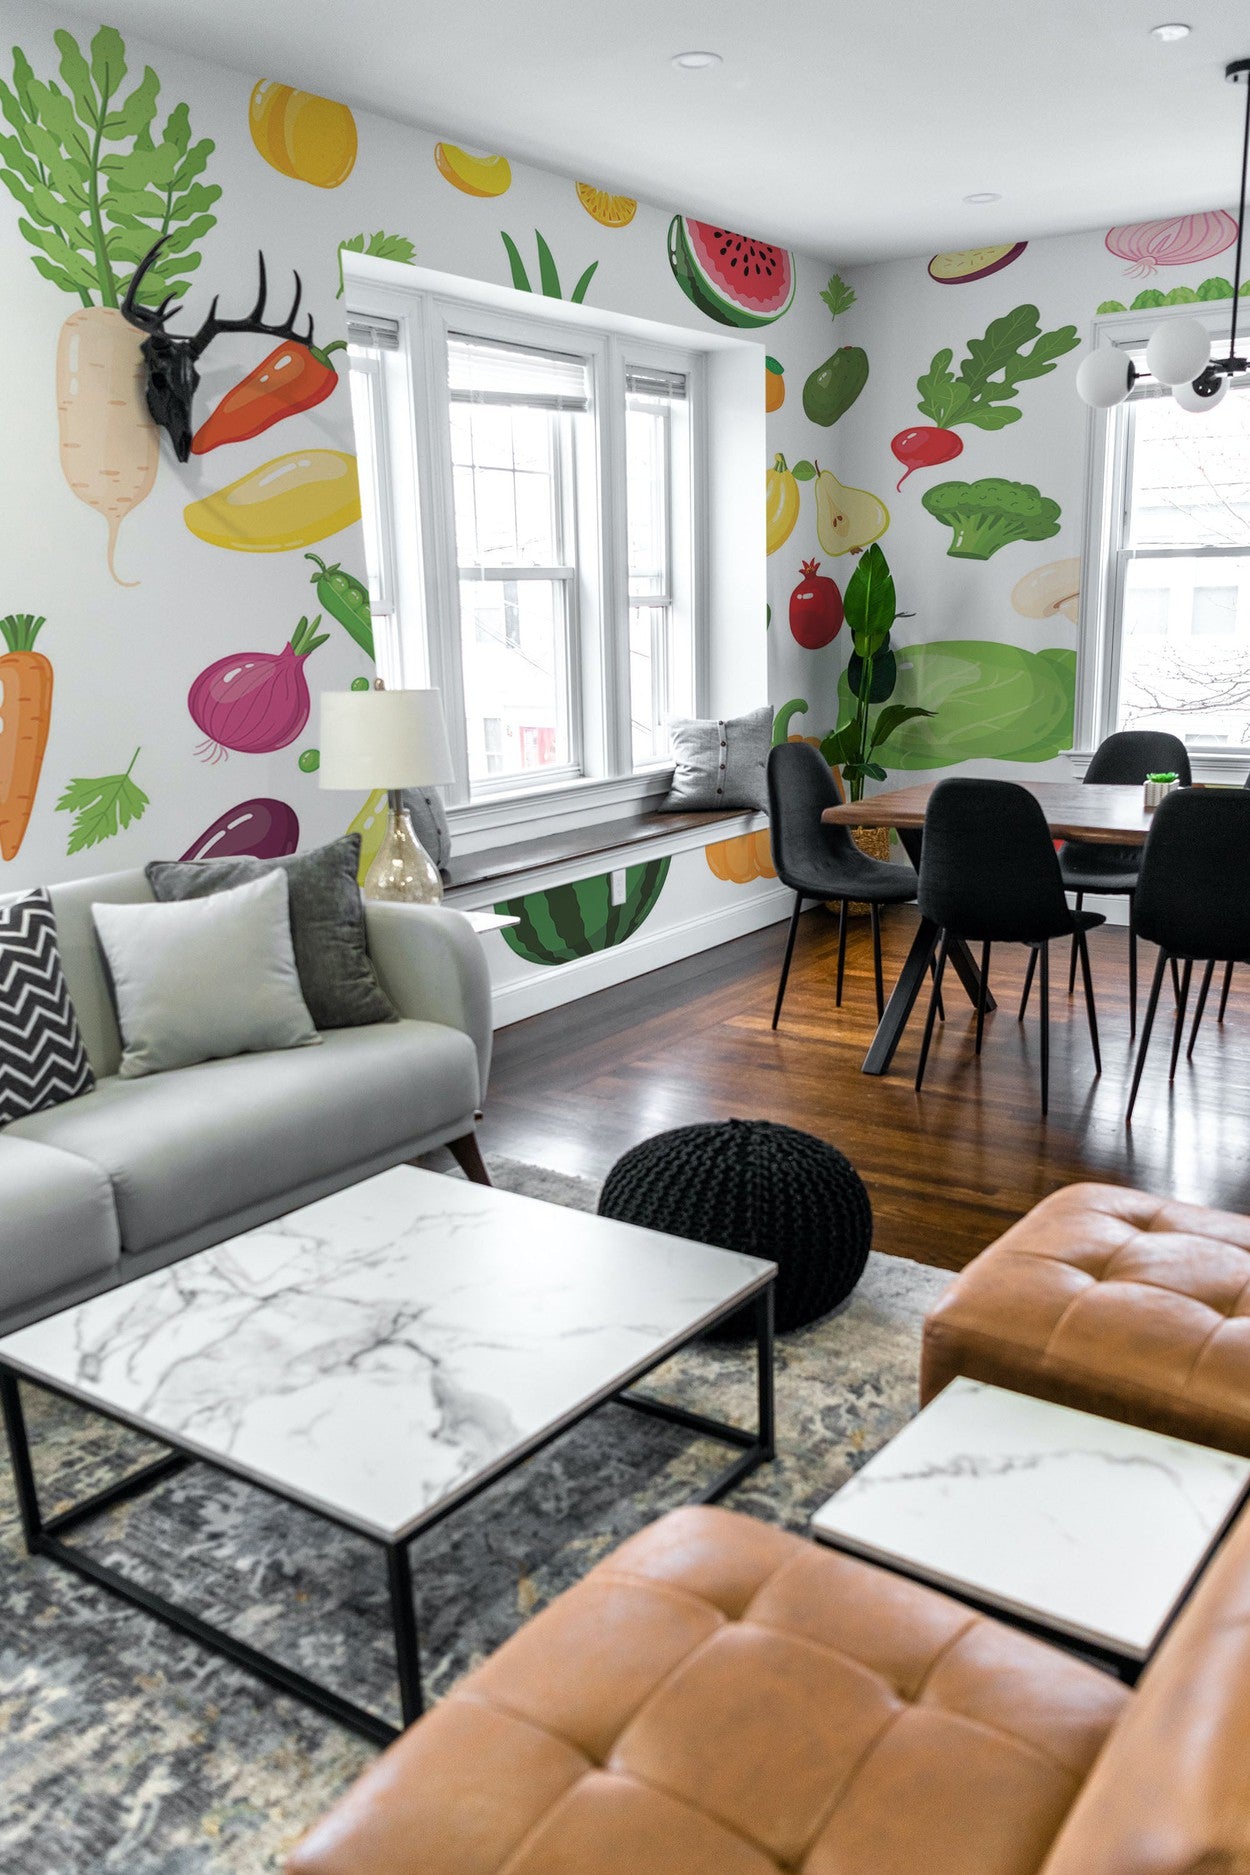 A modern living room interior with a vibrant wall mural featuring oversized fruits and vegetables.